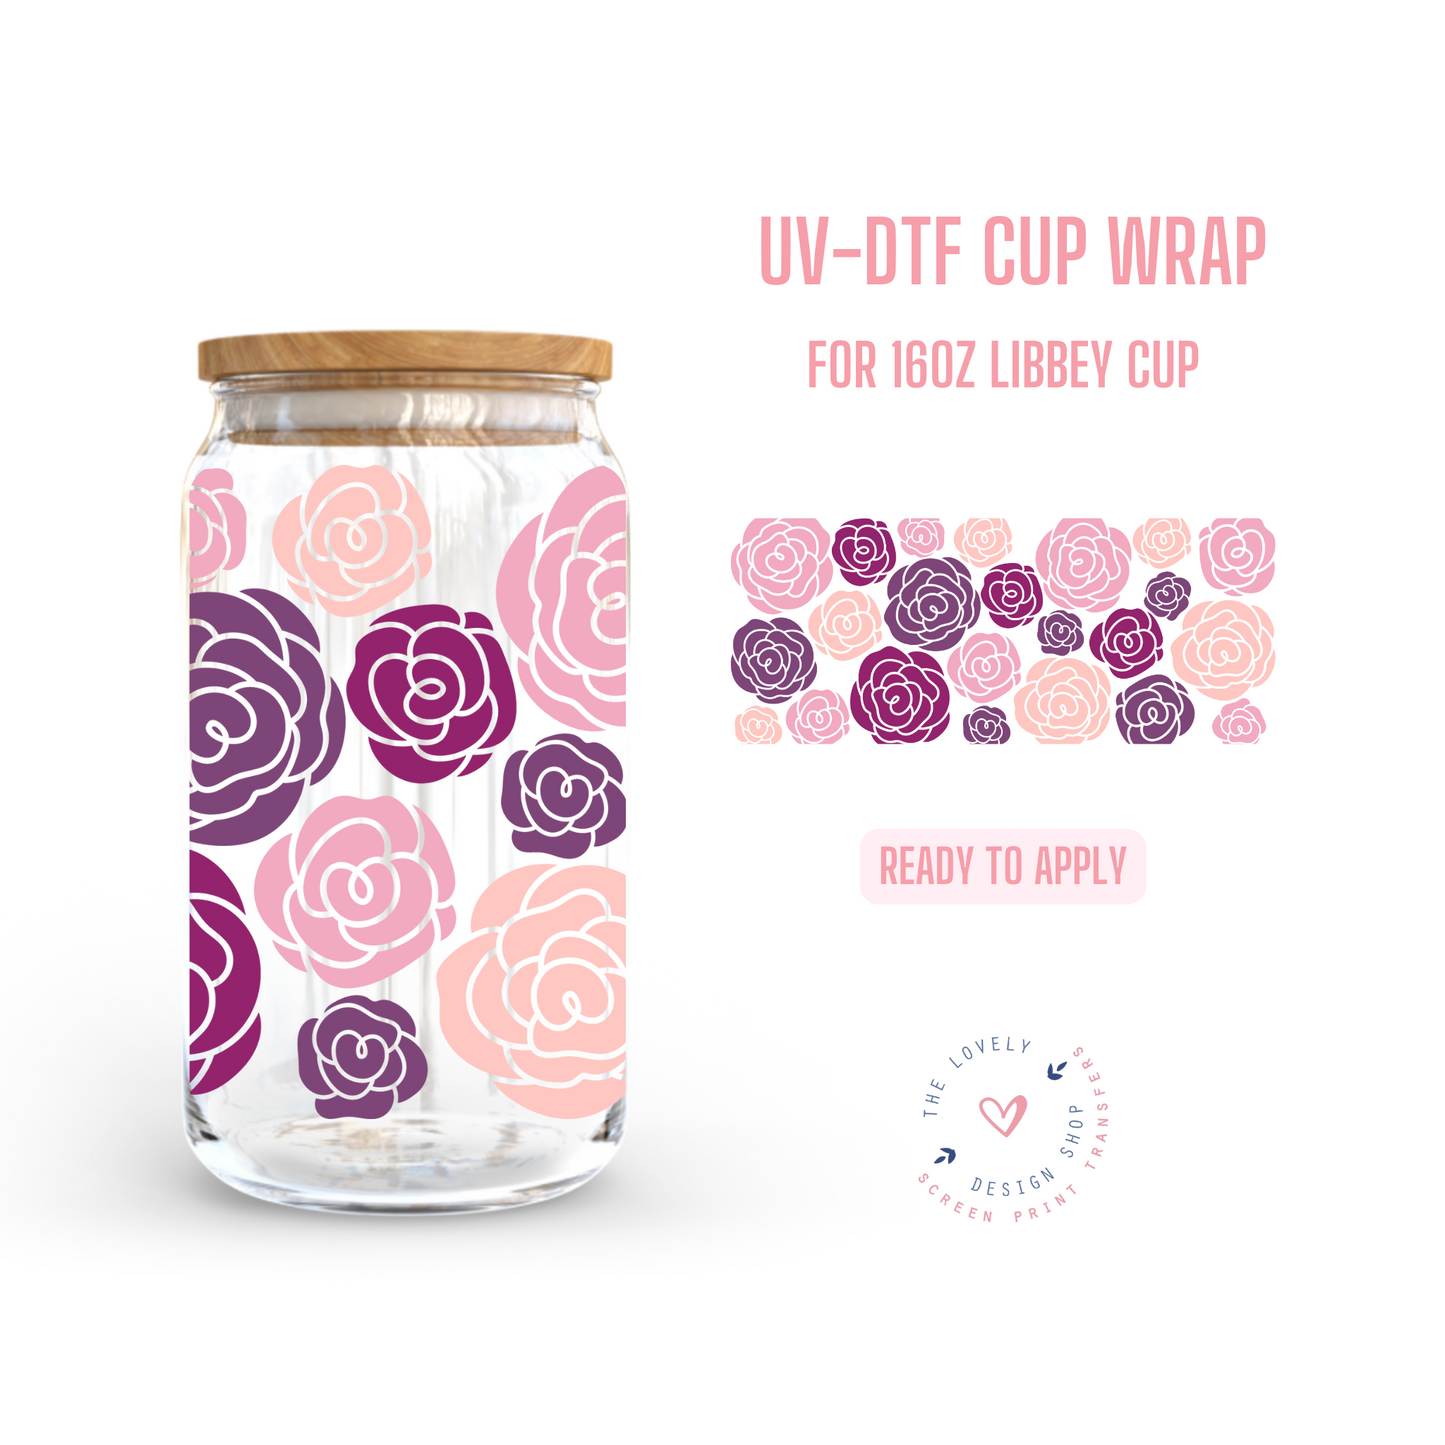 Roses - UV DTF 16 oz Libbey Cup Wrap (Ready to Ship)